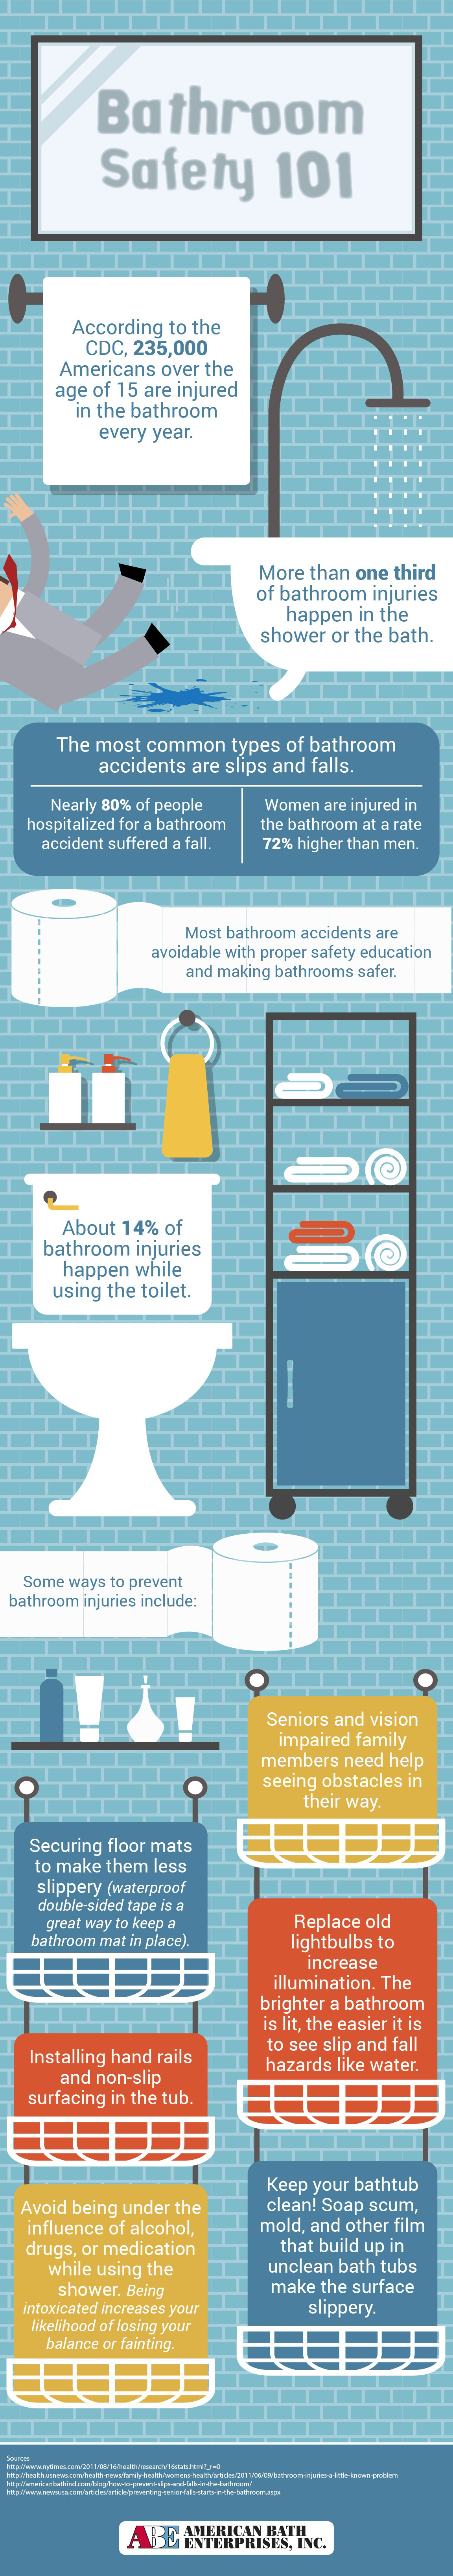 Bathroom Safety 101 Infographic